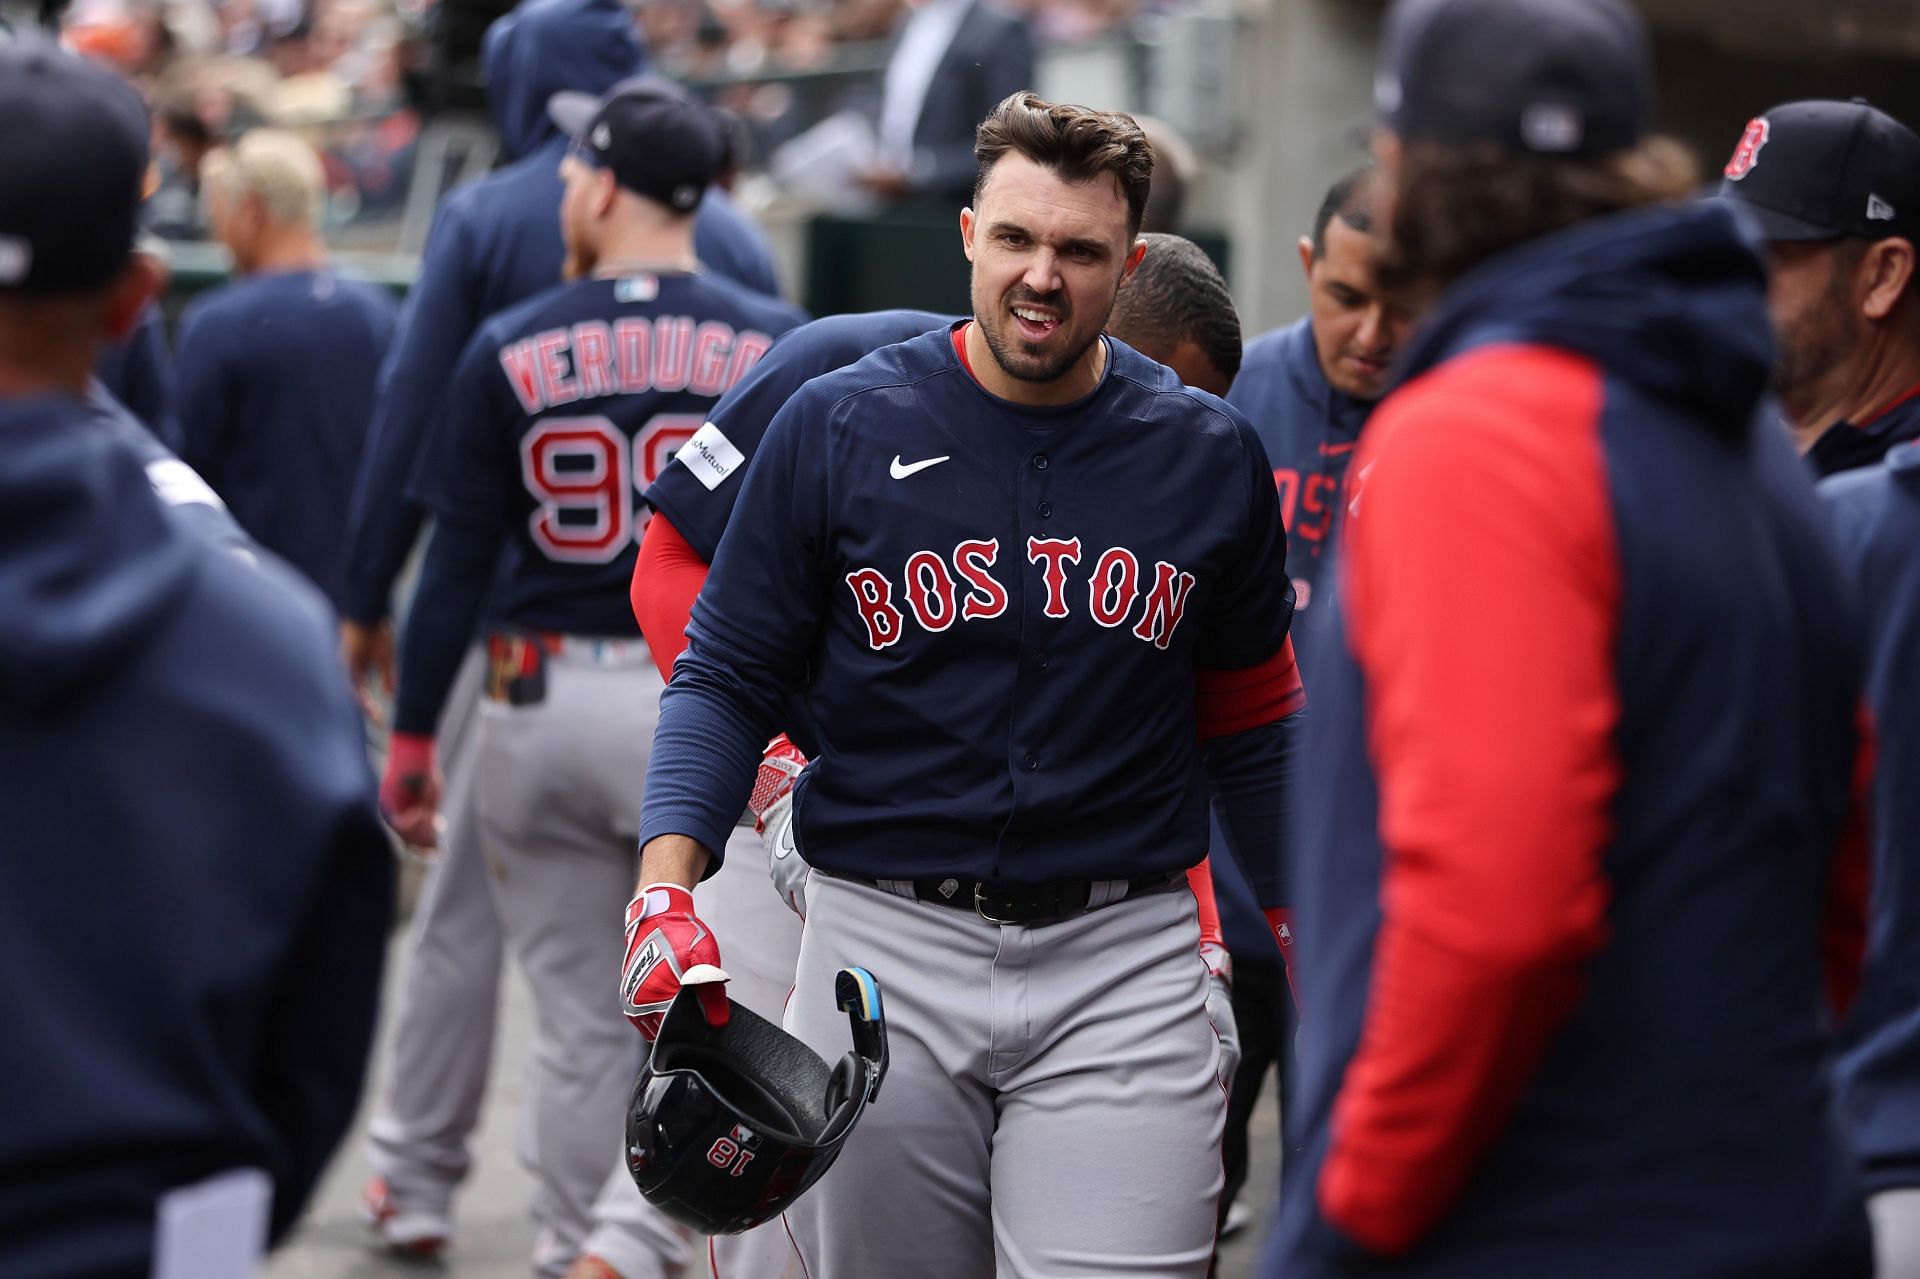 Adam Duvall wrist injury leaves Red Sox in a quandry - AS USA